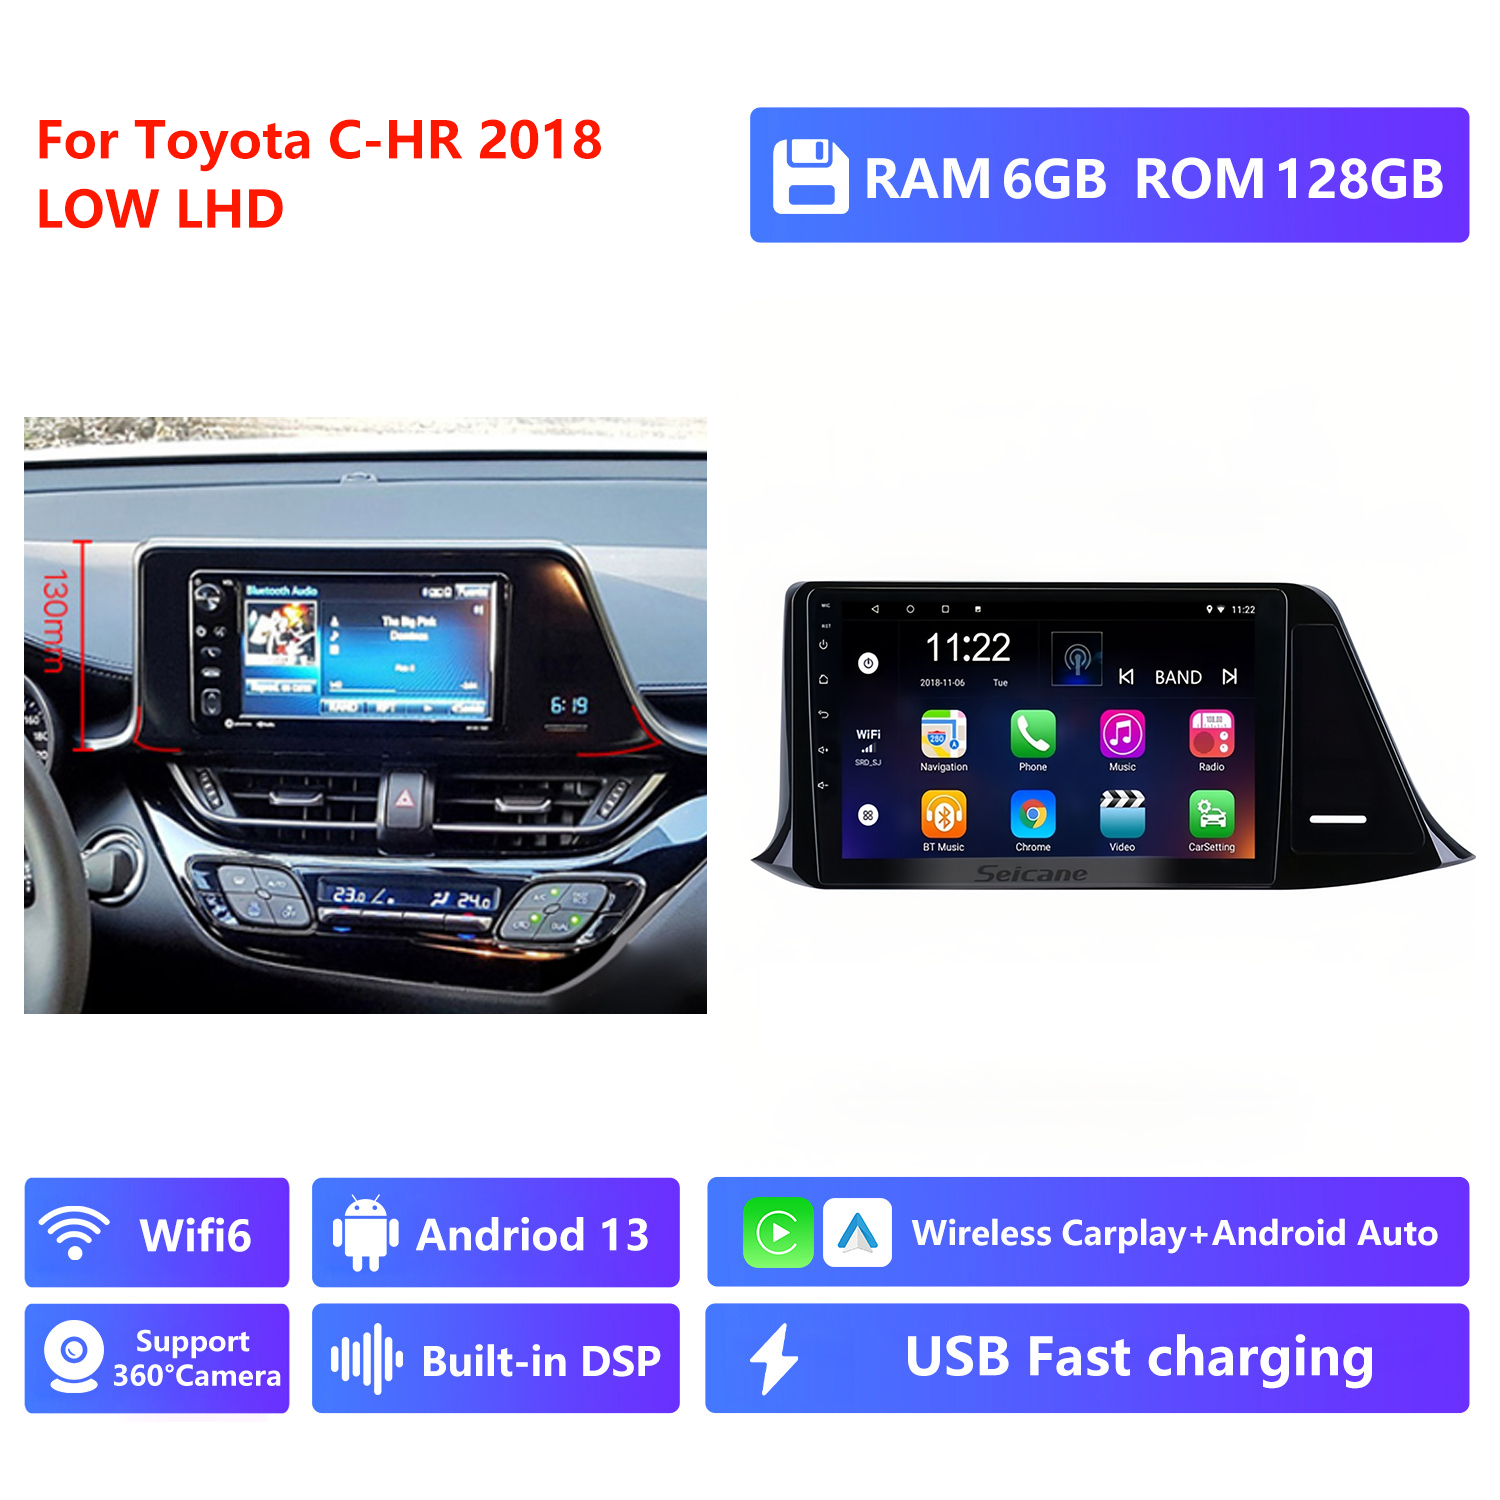 RAM 6G,ROM 128G,Low level,LHD